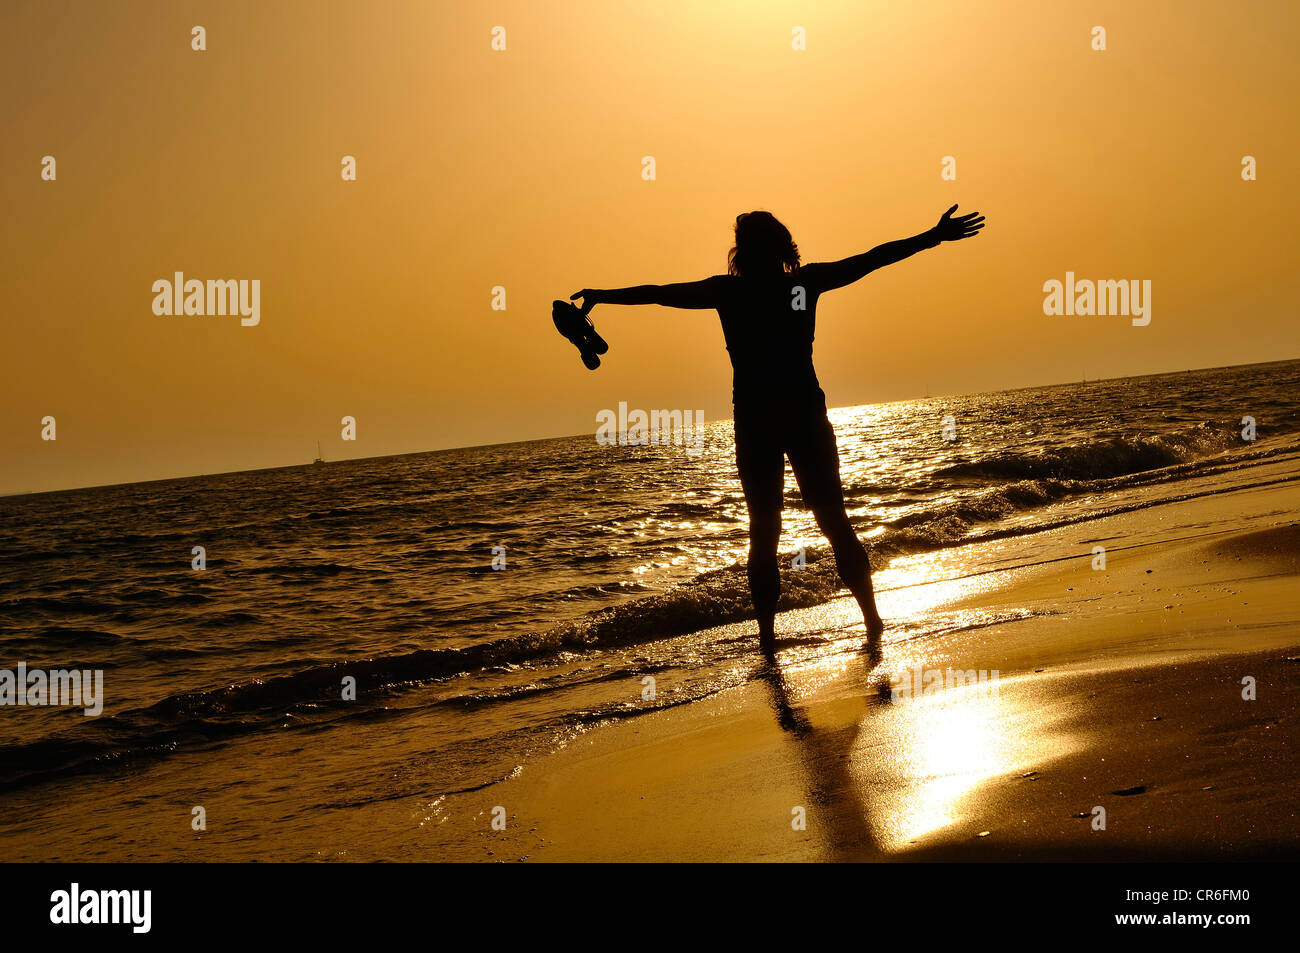 Woman standing on the beach with wide spread arms, evening mood, Lido di Ostia, Rome, Lazio region, Italy, Europe Stock Photo